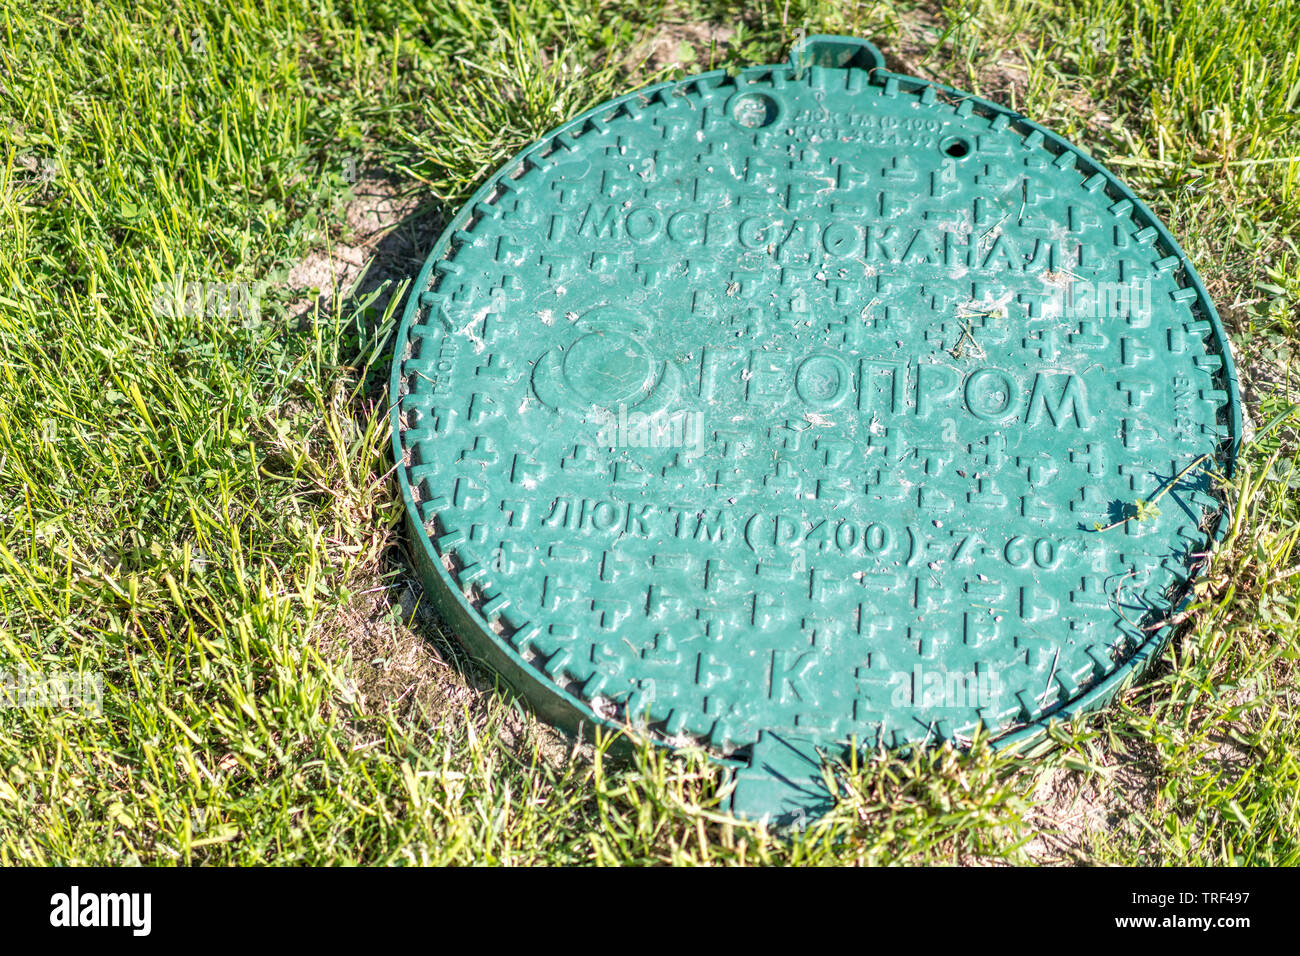 Moscow, Russia - May 18, 2019: Manhole green. Stock Photo